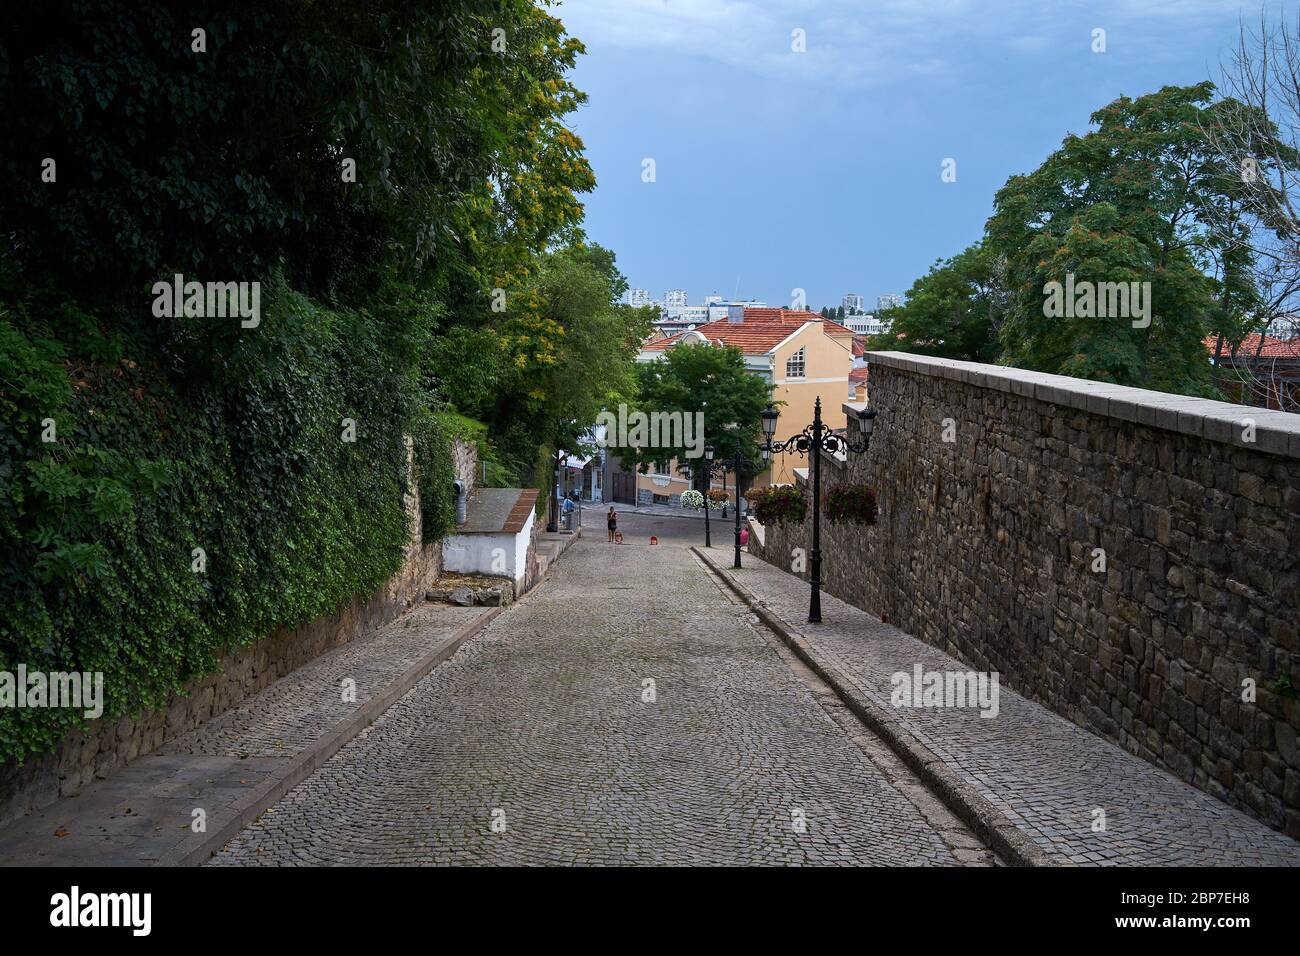 PLOVDIV, BULGARIA - JULY 02, 2019: One of the streets in the old city. Plovdiv is the second largest city in Bulgaria. Stock Photo